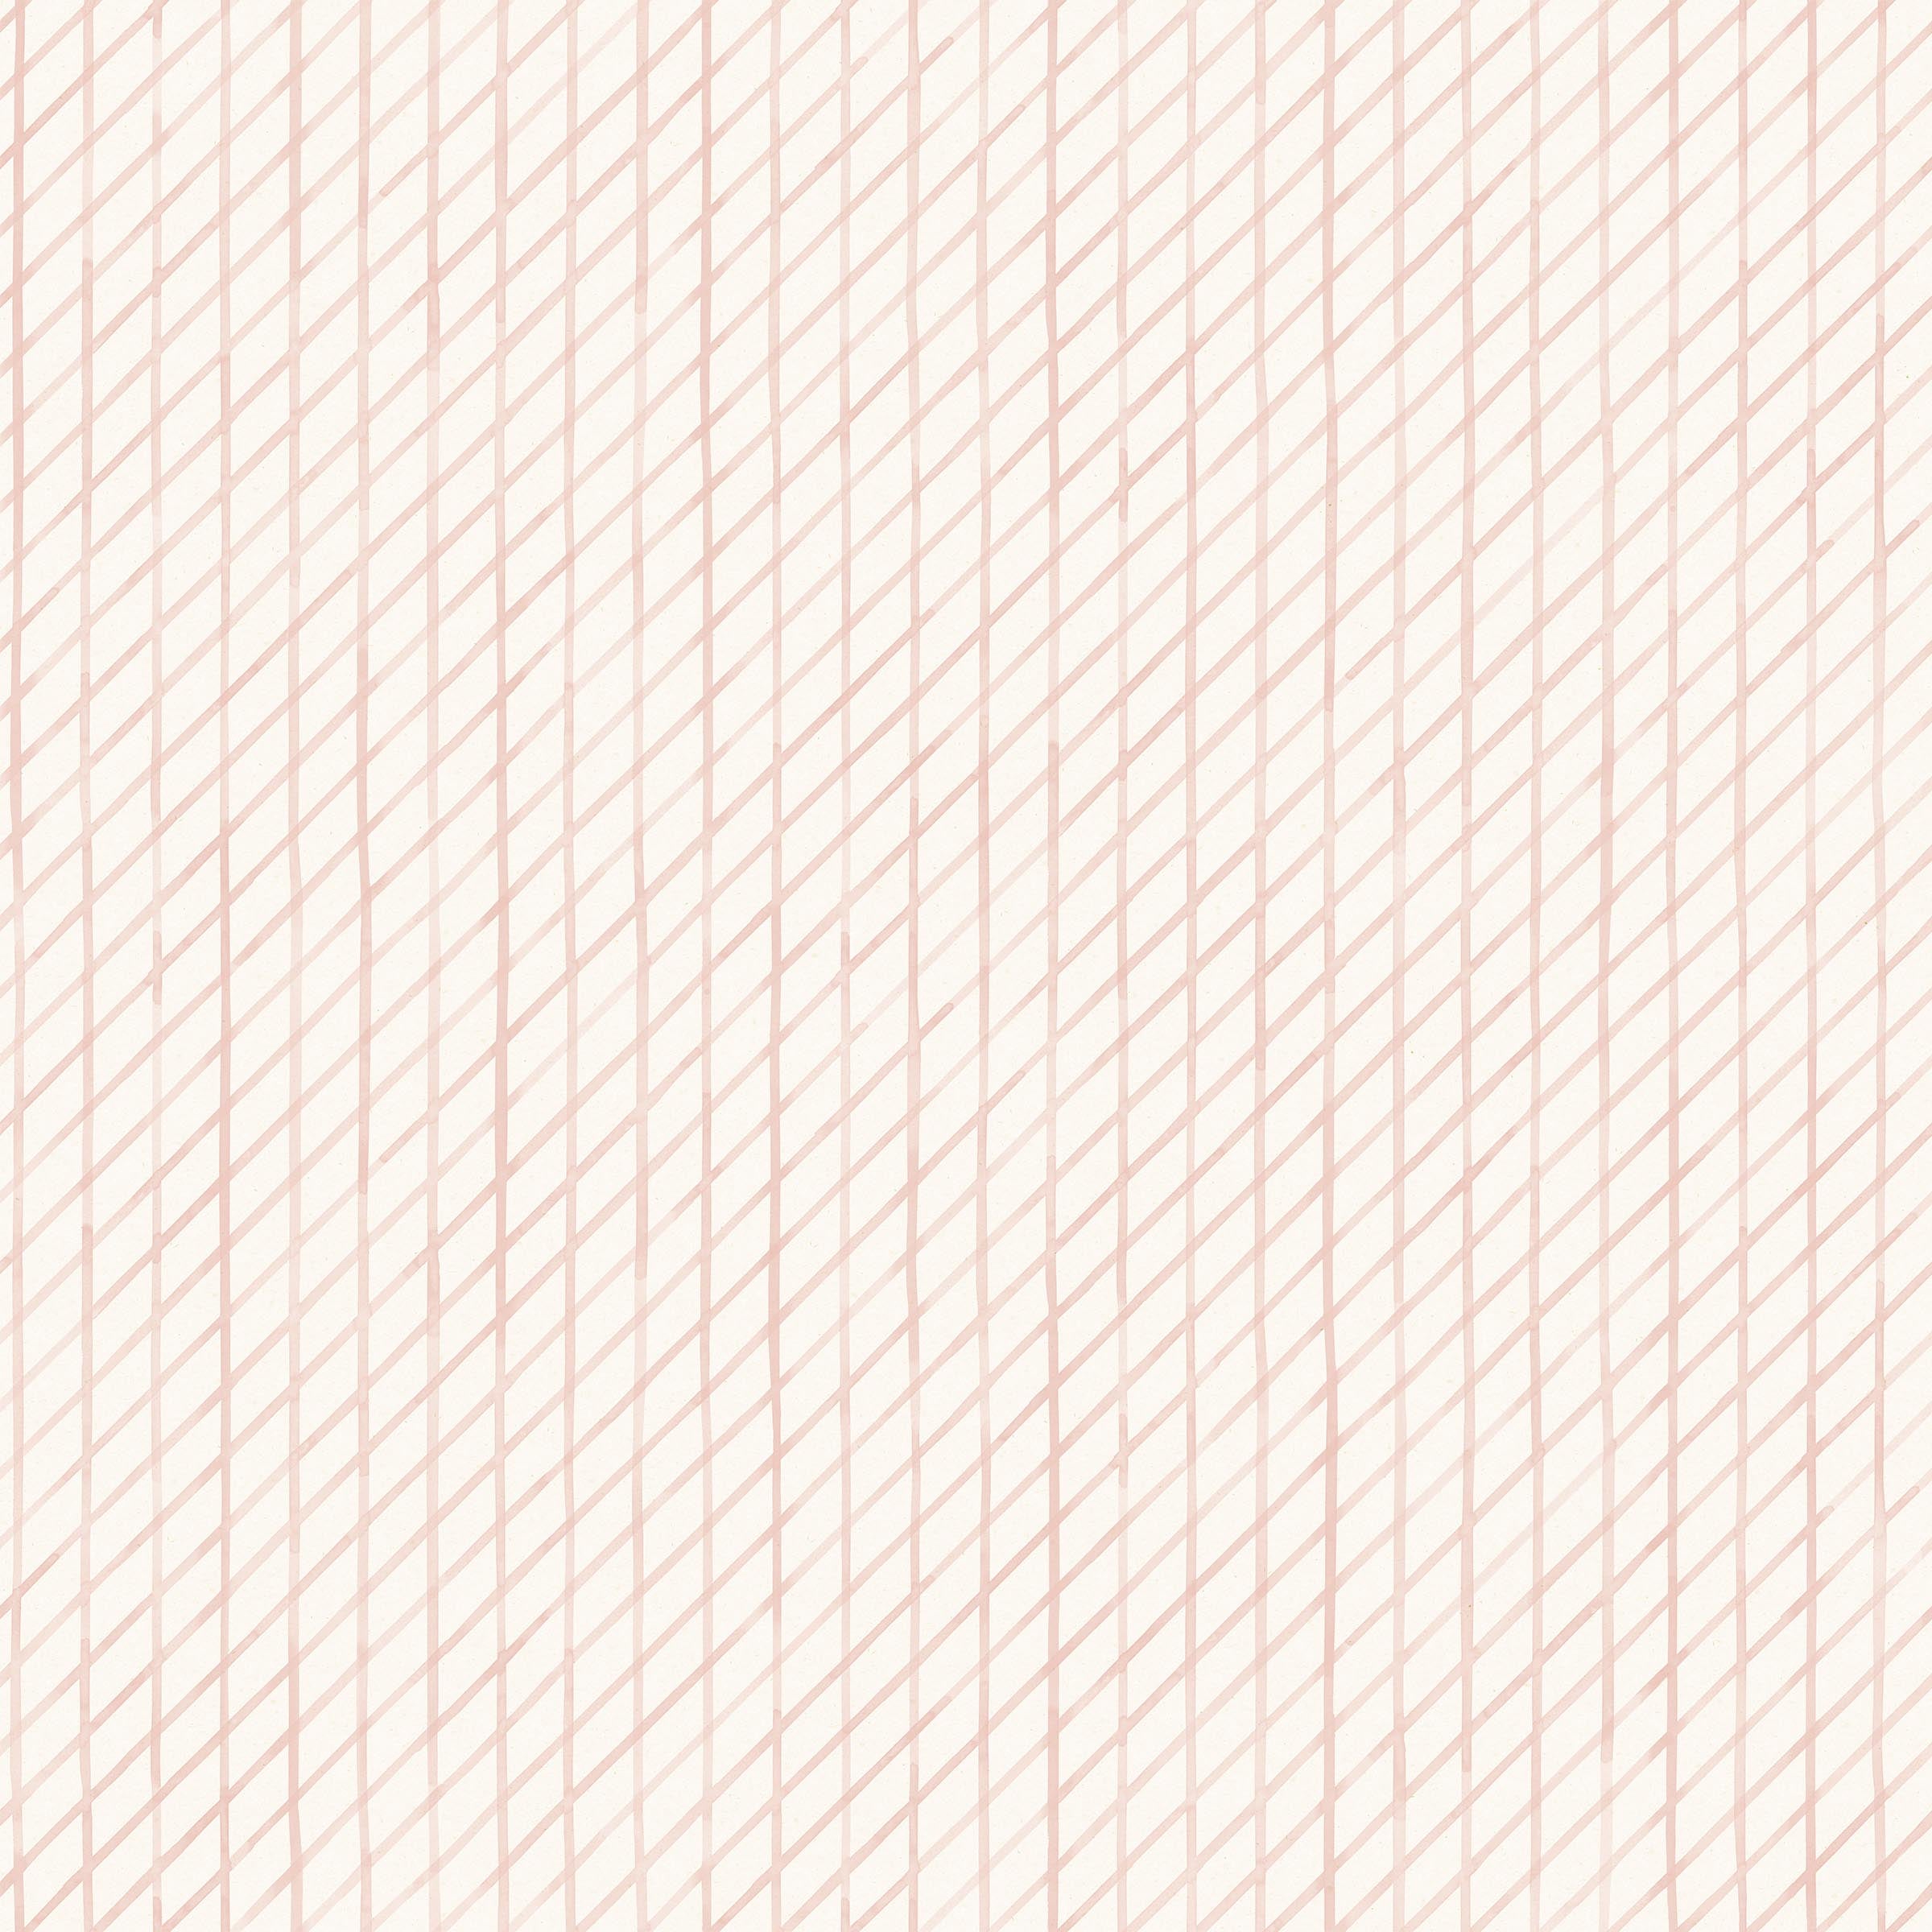 Detail of wallpaper in a painterly grid pattern in light pink on a white field.